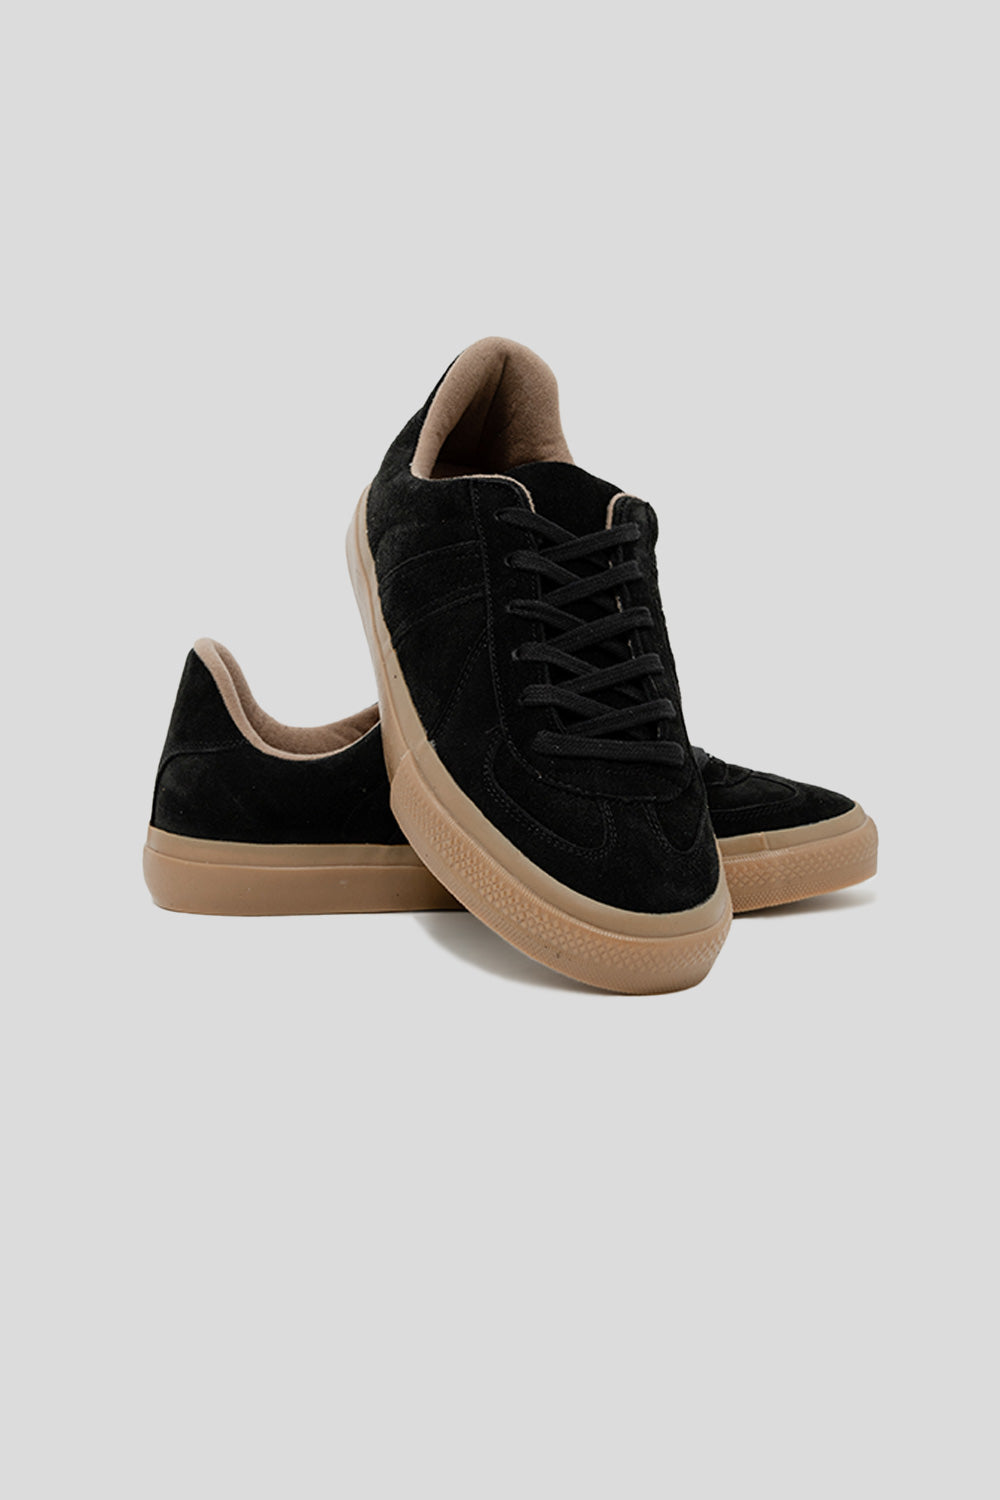 Reproduction of Found German Military Trainer "Skateboarding" Shoe in Black Suede